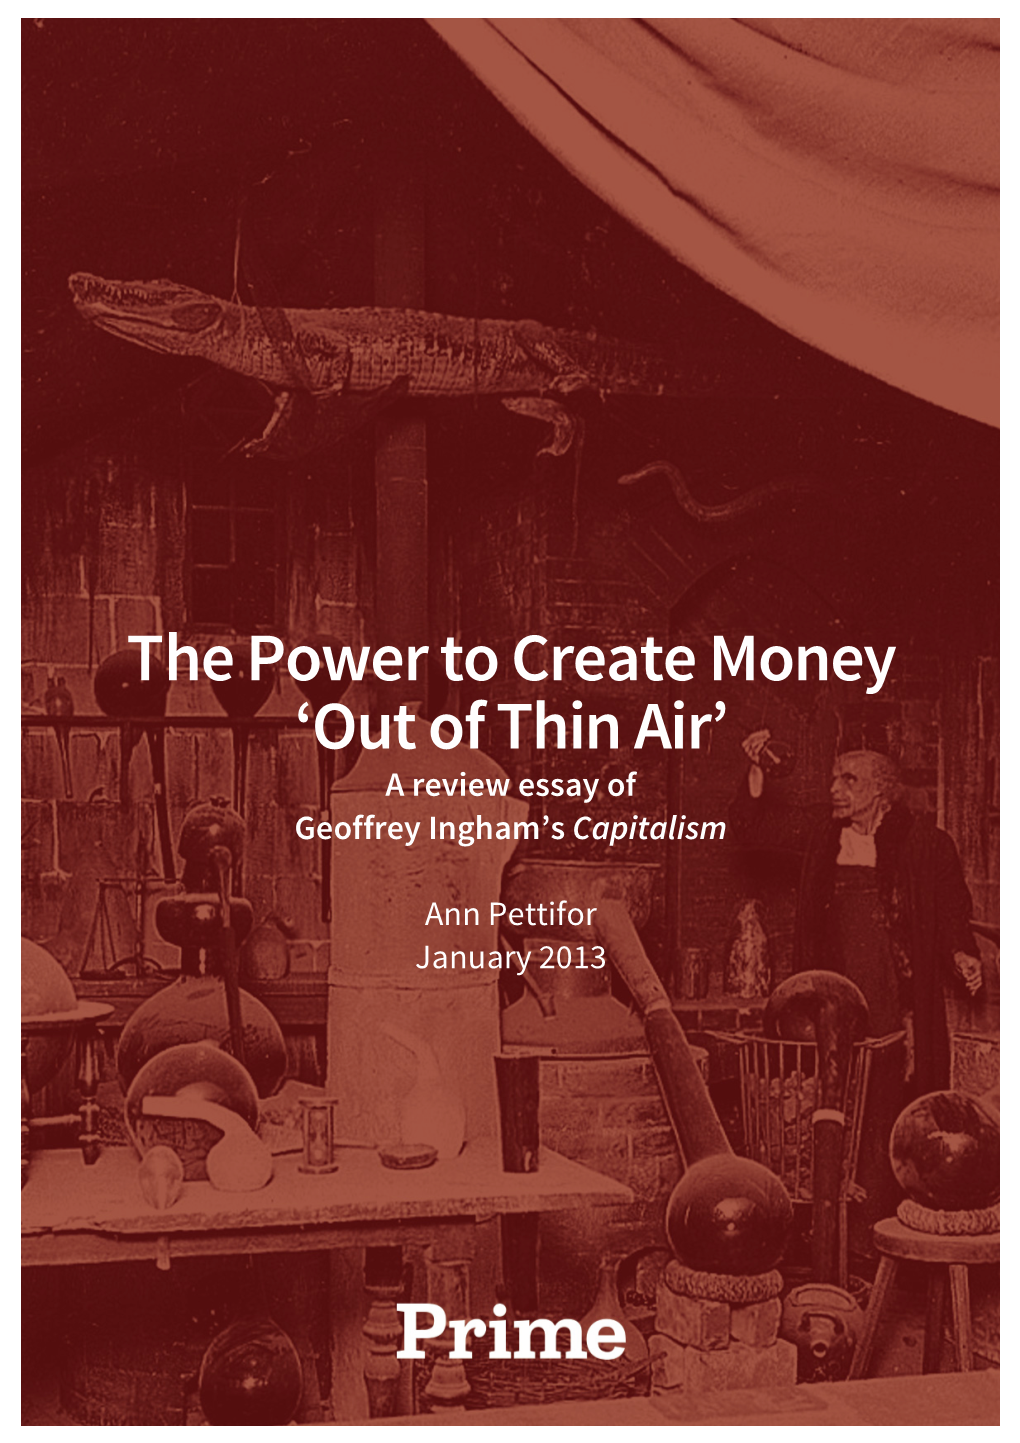 The Power to Create Money 'Out of Thin Air'